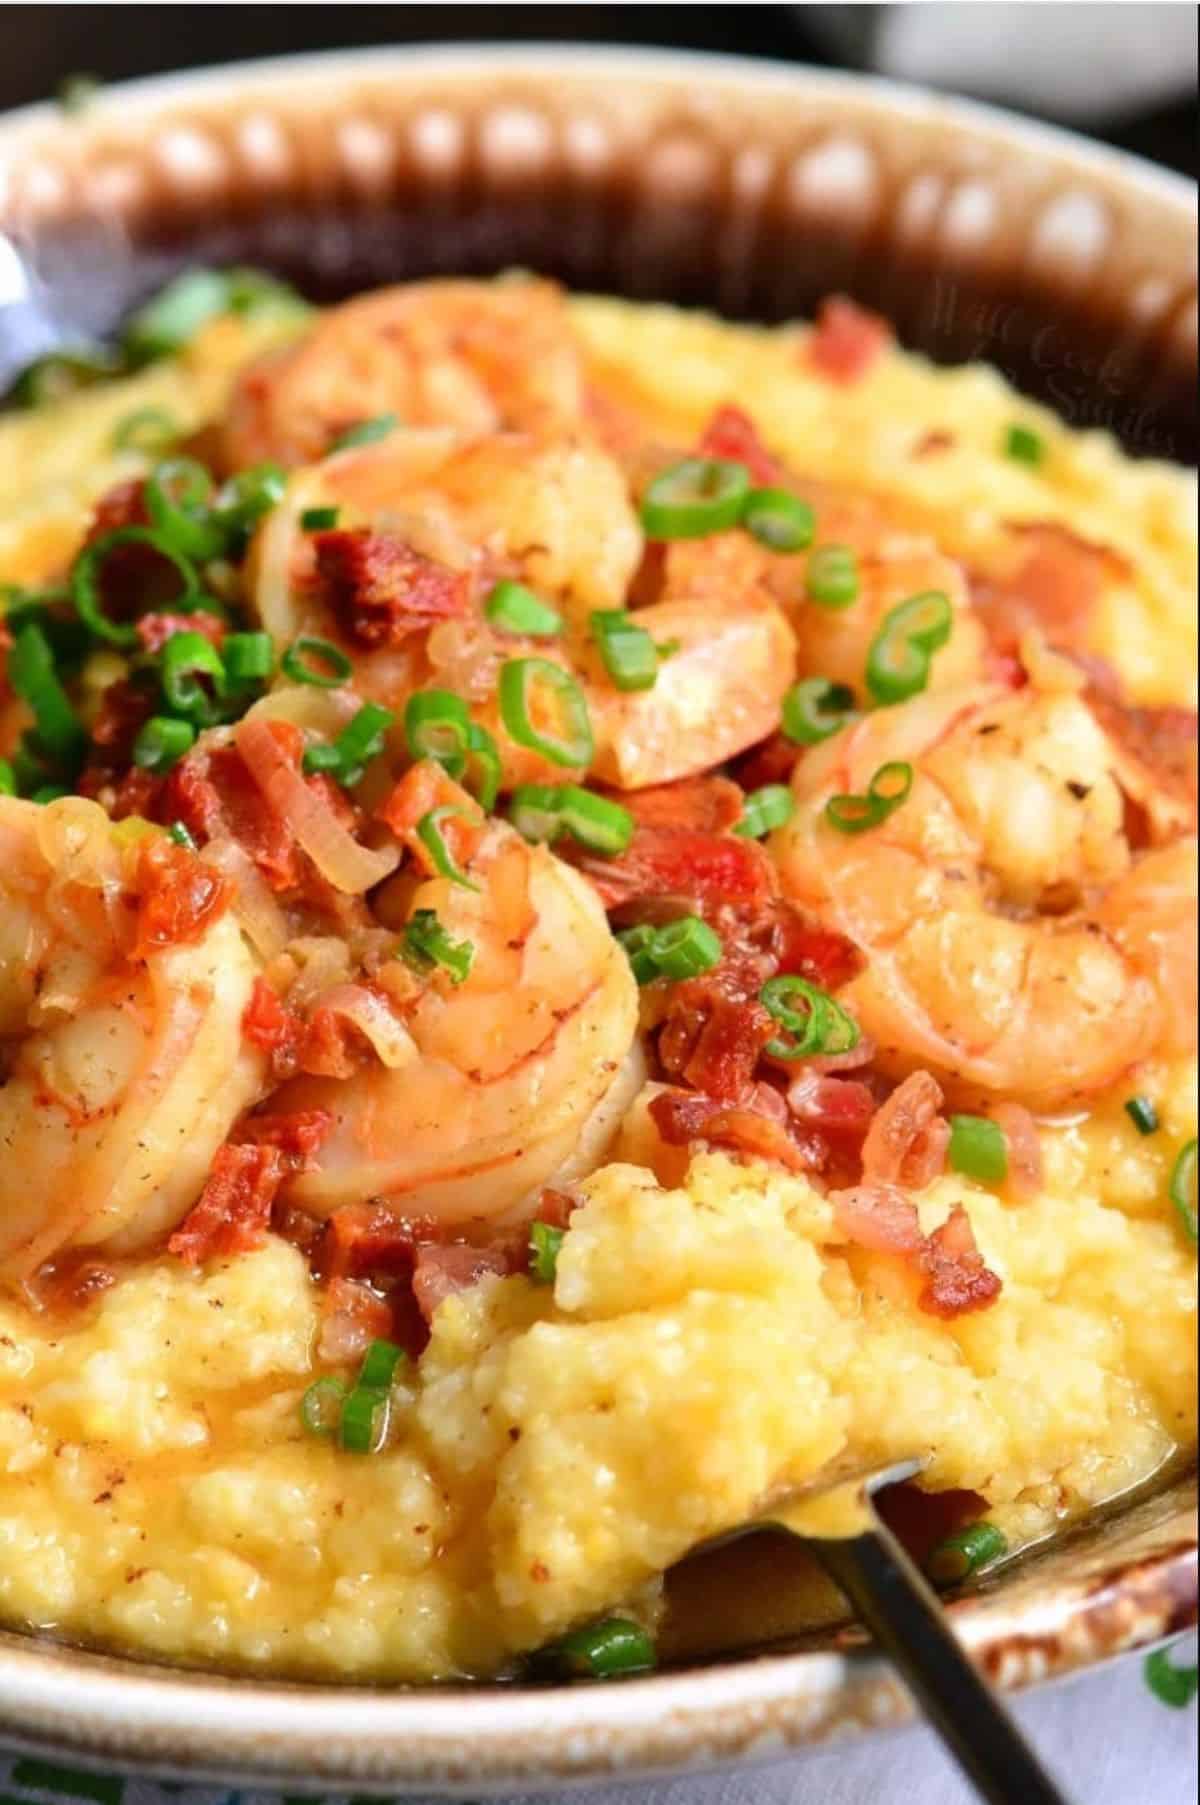 scooping out some cheesy grits from the bowl of shrimp topped over grits.